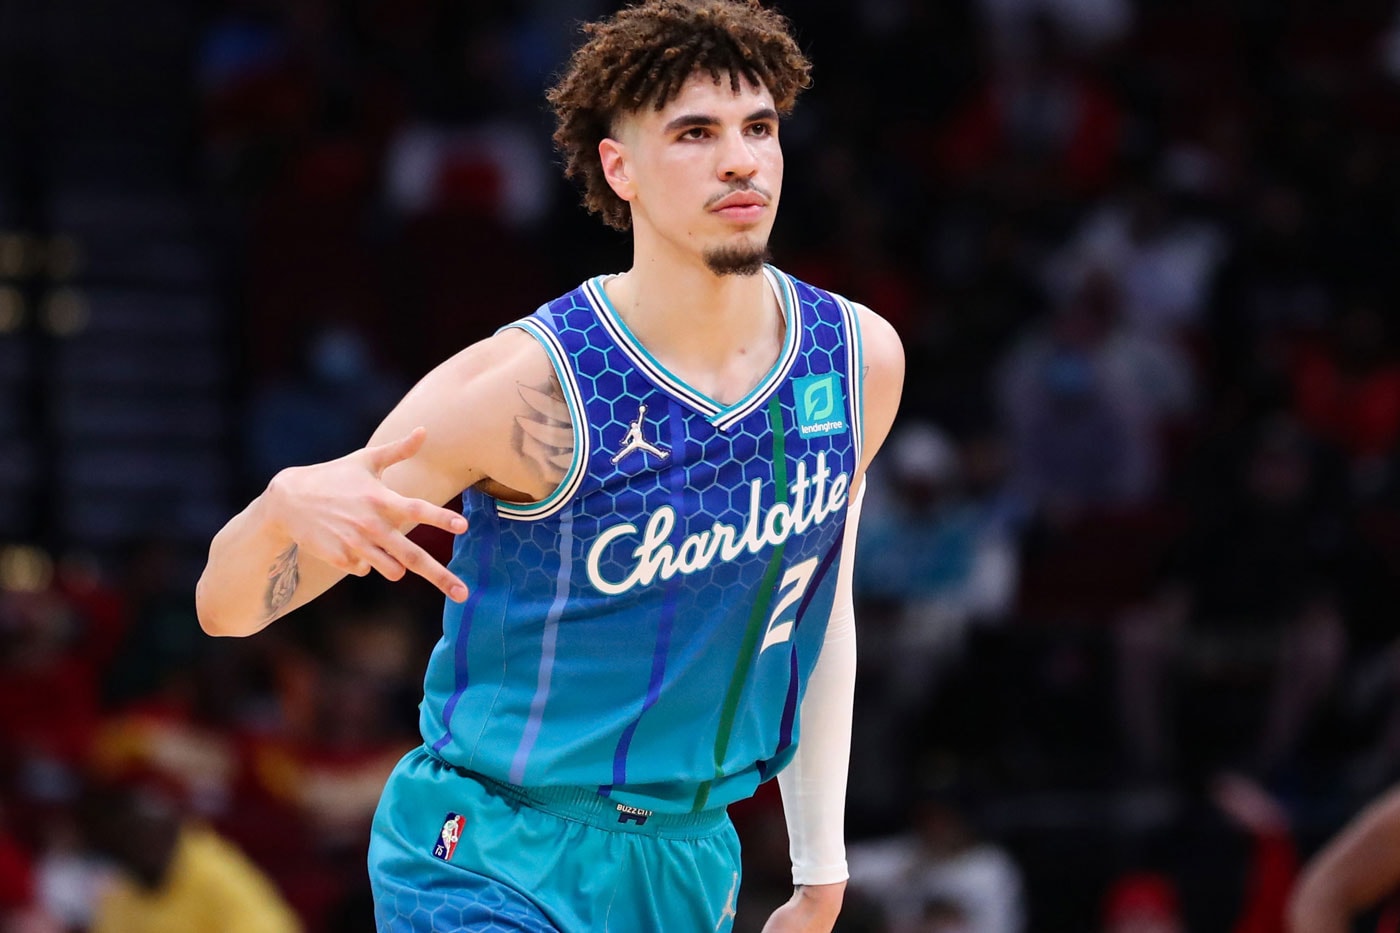 LaVar Ball Says He Thinks LaMelo Ball Can Be Youngest MVP in the NBA charlotte hornets michael jordan basketball